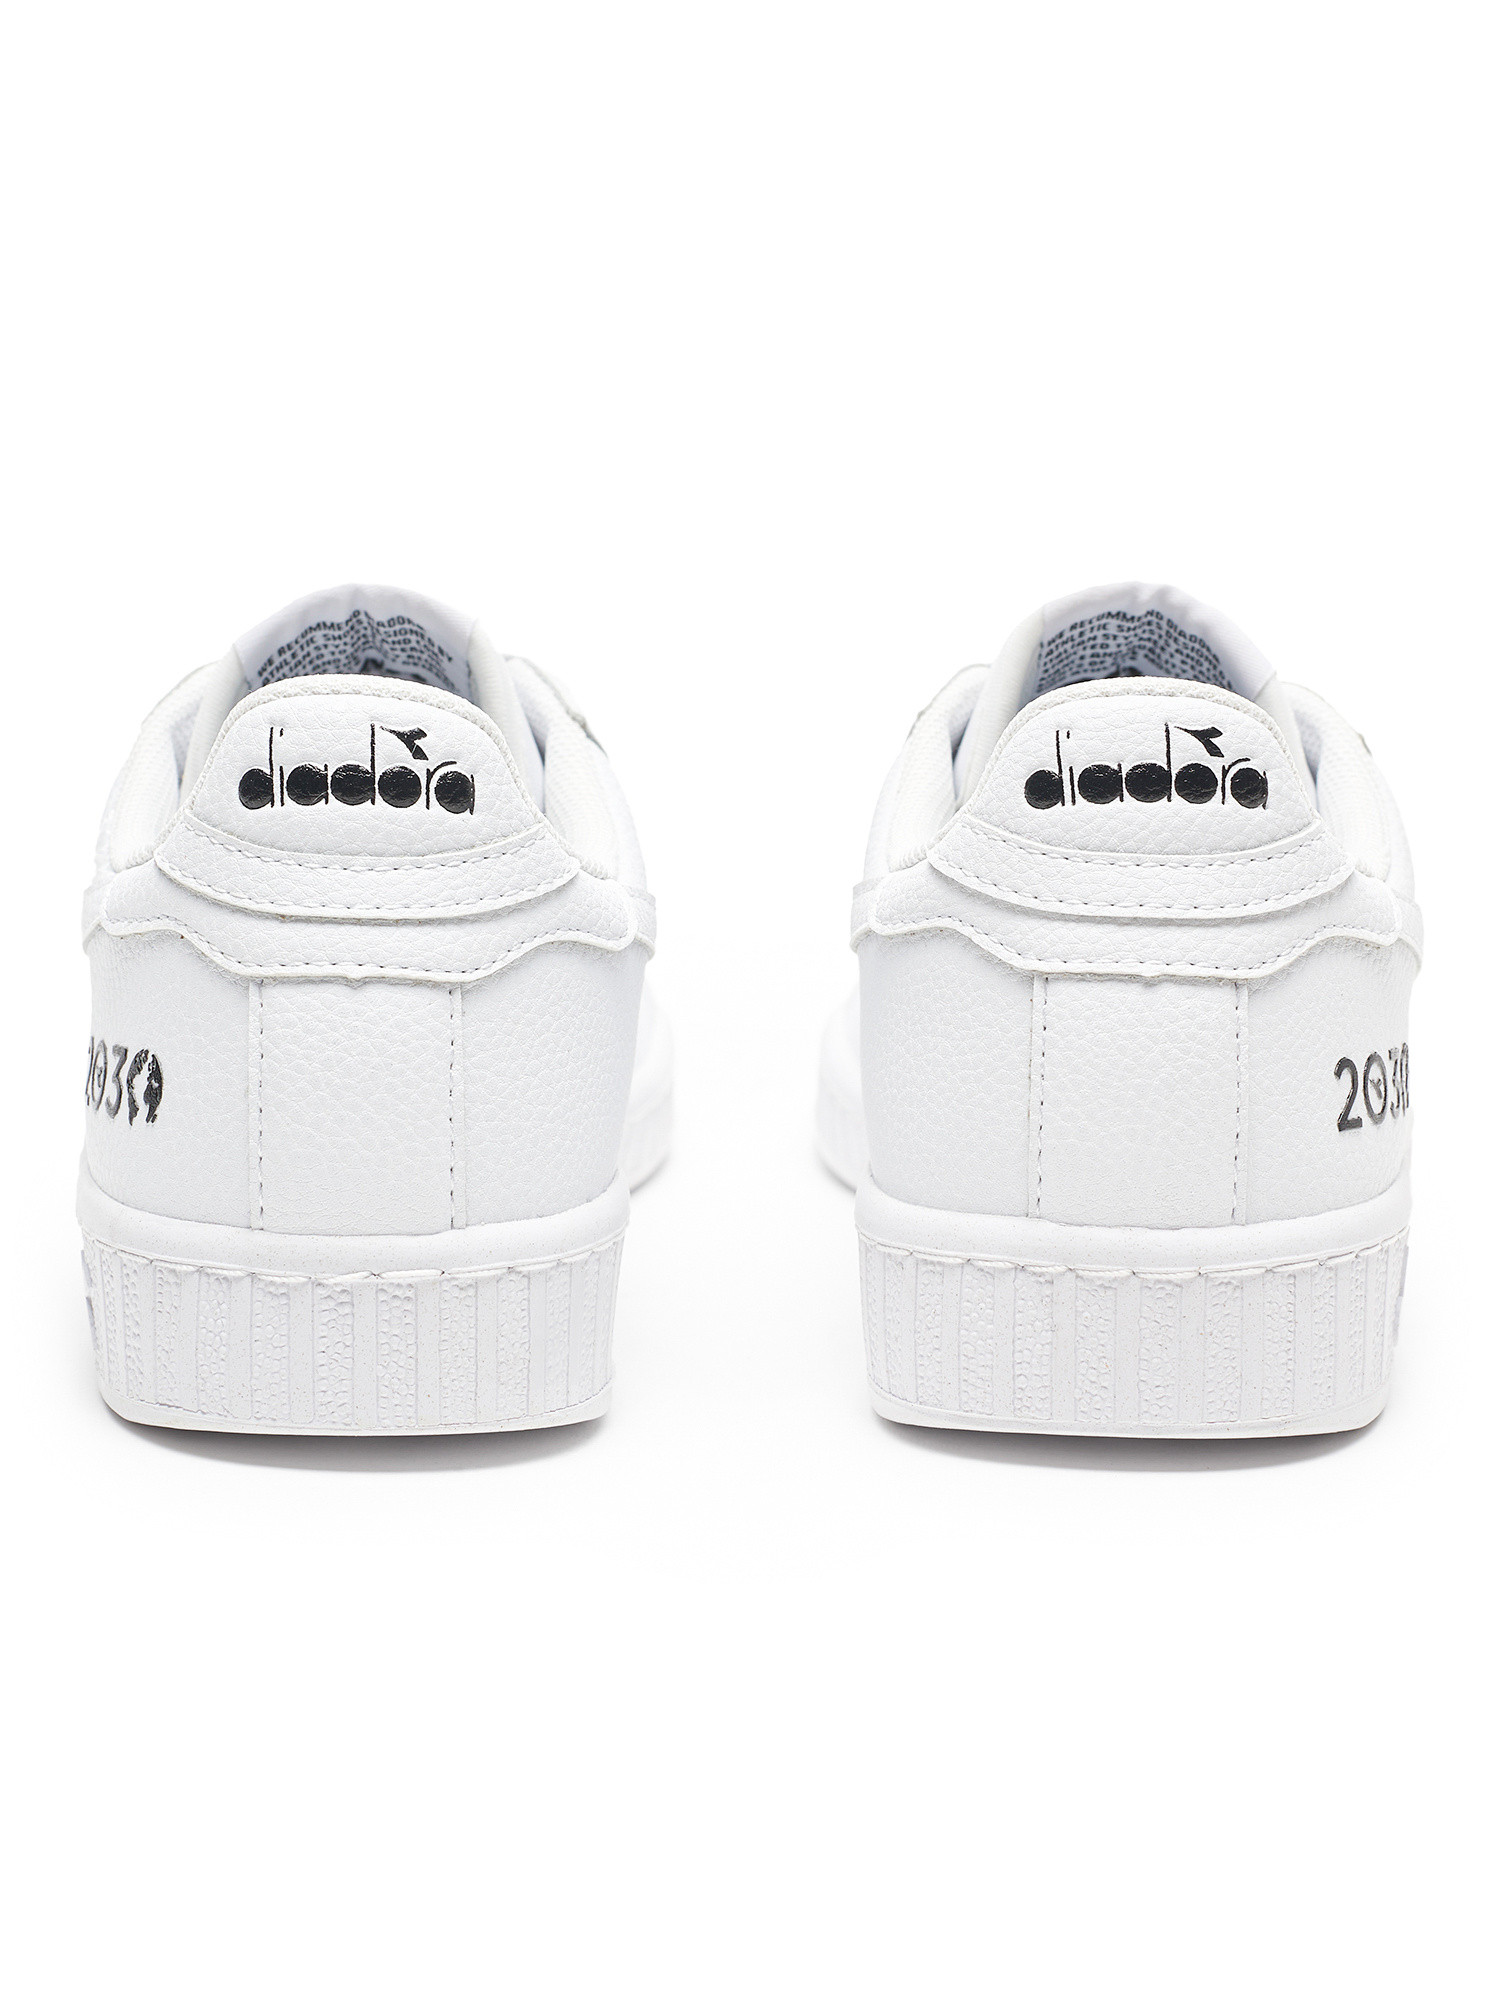 Diadora - Game L Low 2030 Shoes, White, large image number 3